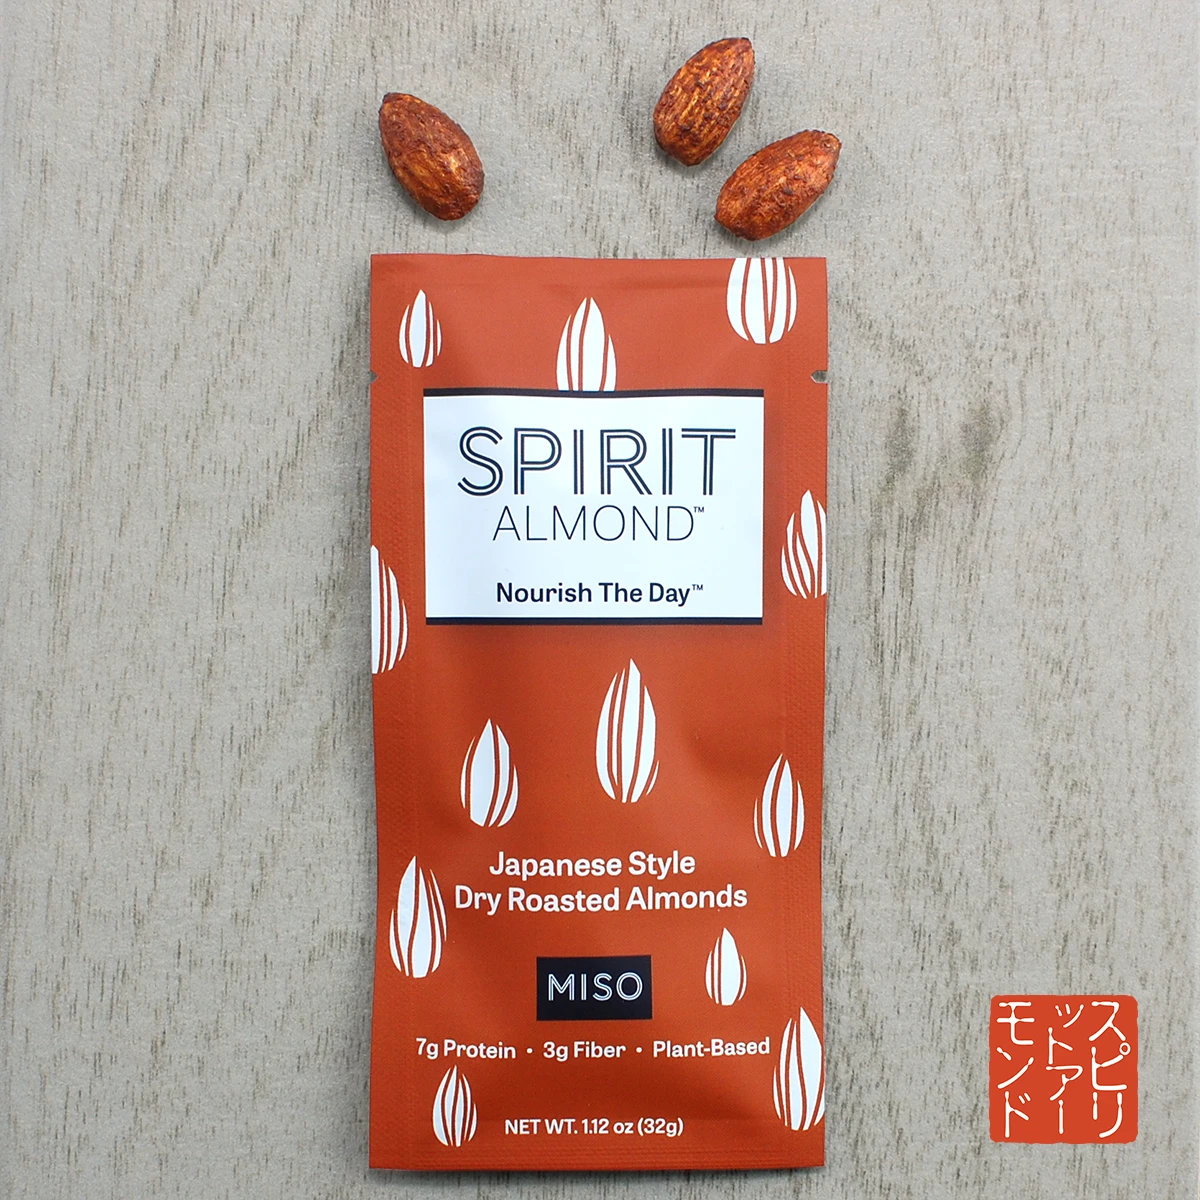 Package of SPIRIT Almond Miso flavor, with a few almonds displayed